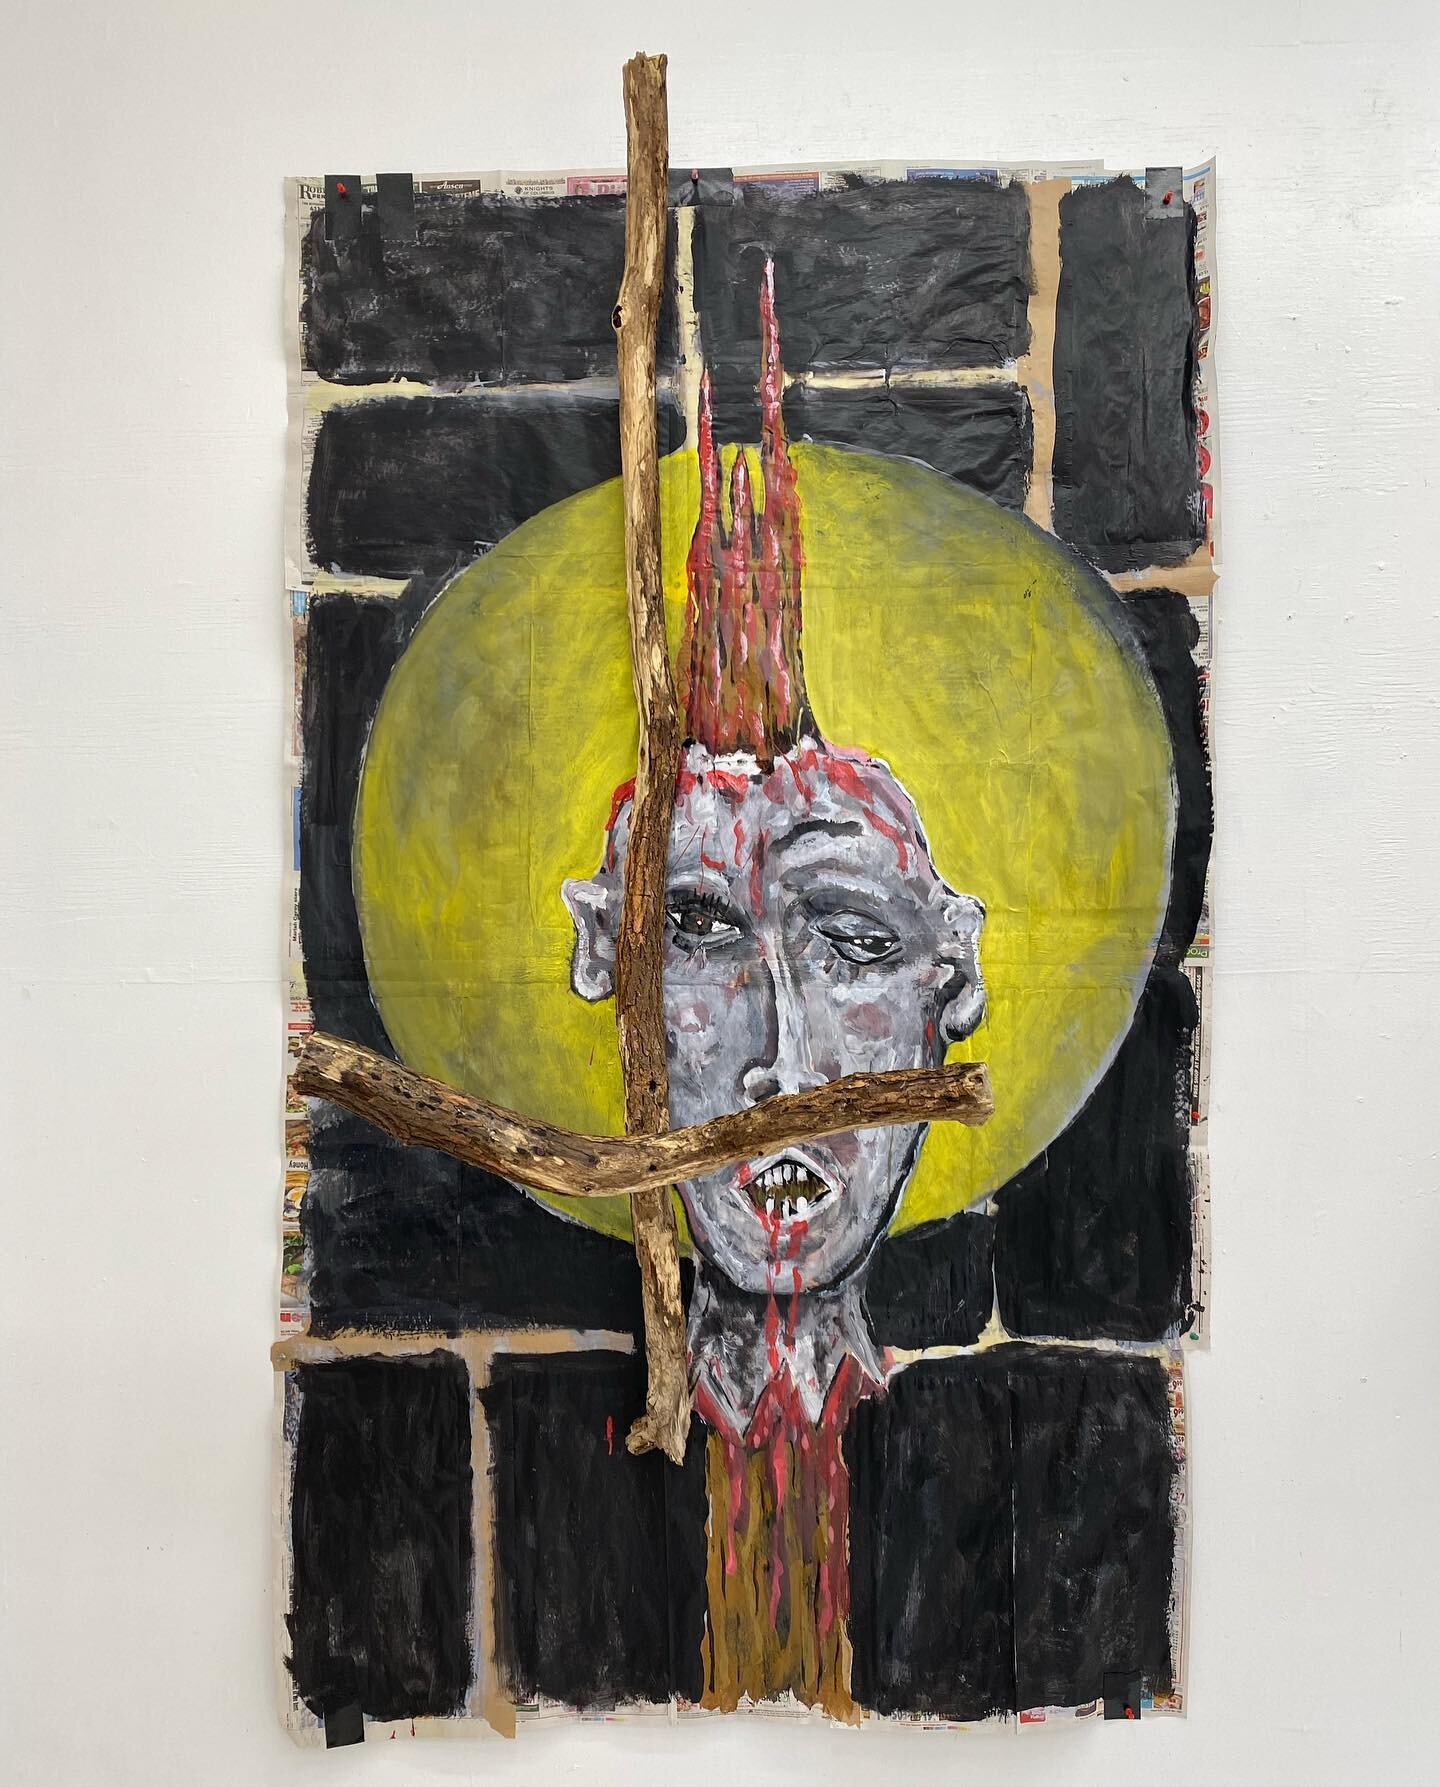 Head Strong - 47&rdquo;x80&rdquo; - acrylic and latex on newspaper, tape and wood 
.
..
&hellip;
#jamesgreco #contemporaryart #contemporarypainting #headstrong #nyc #la